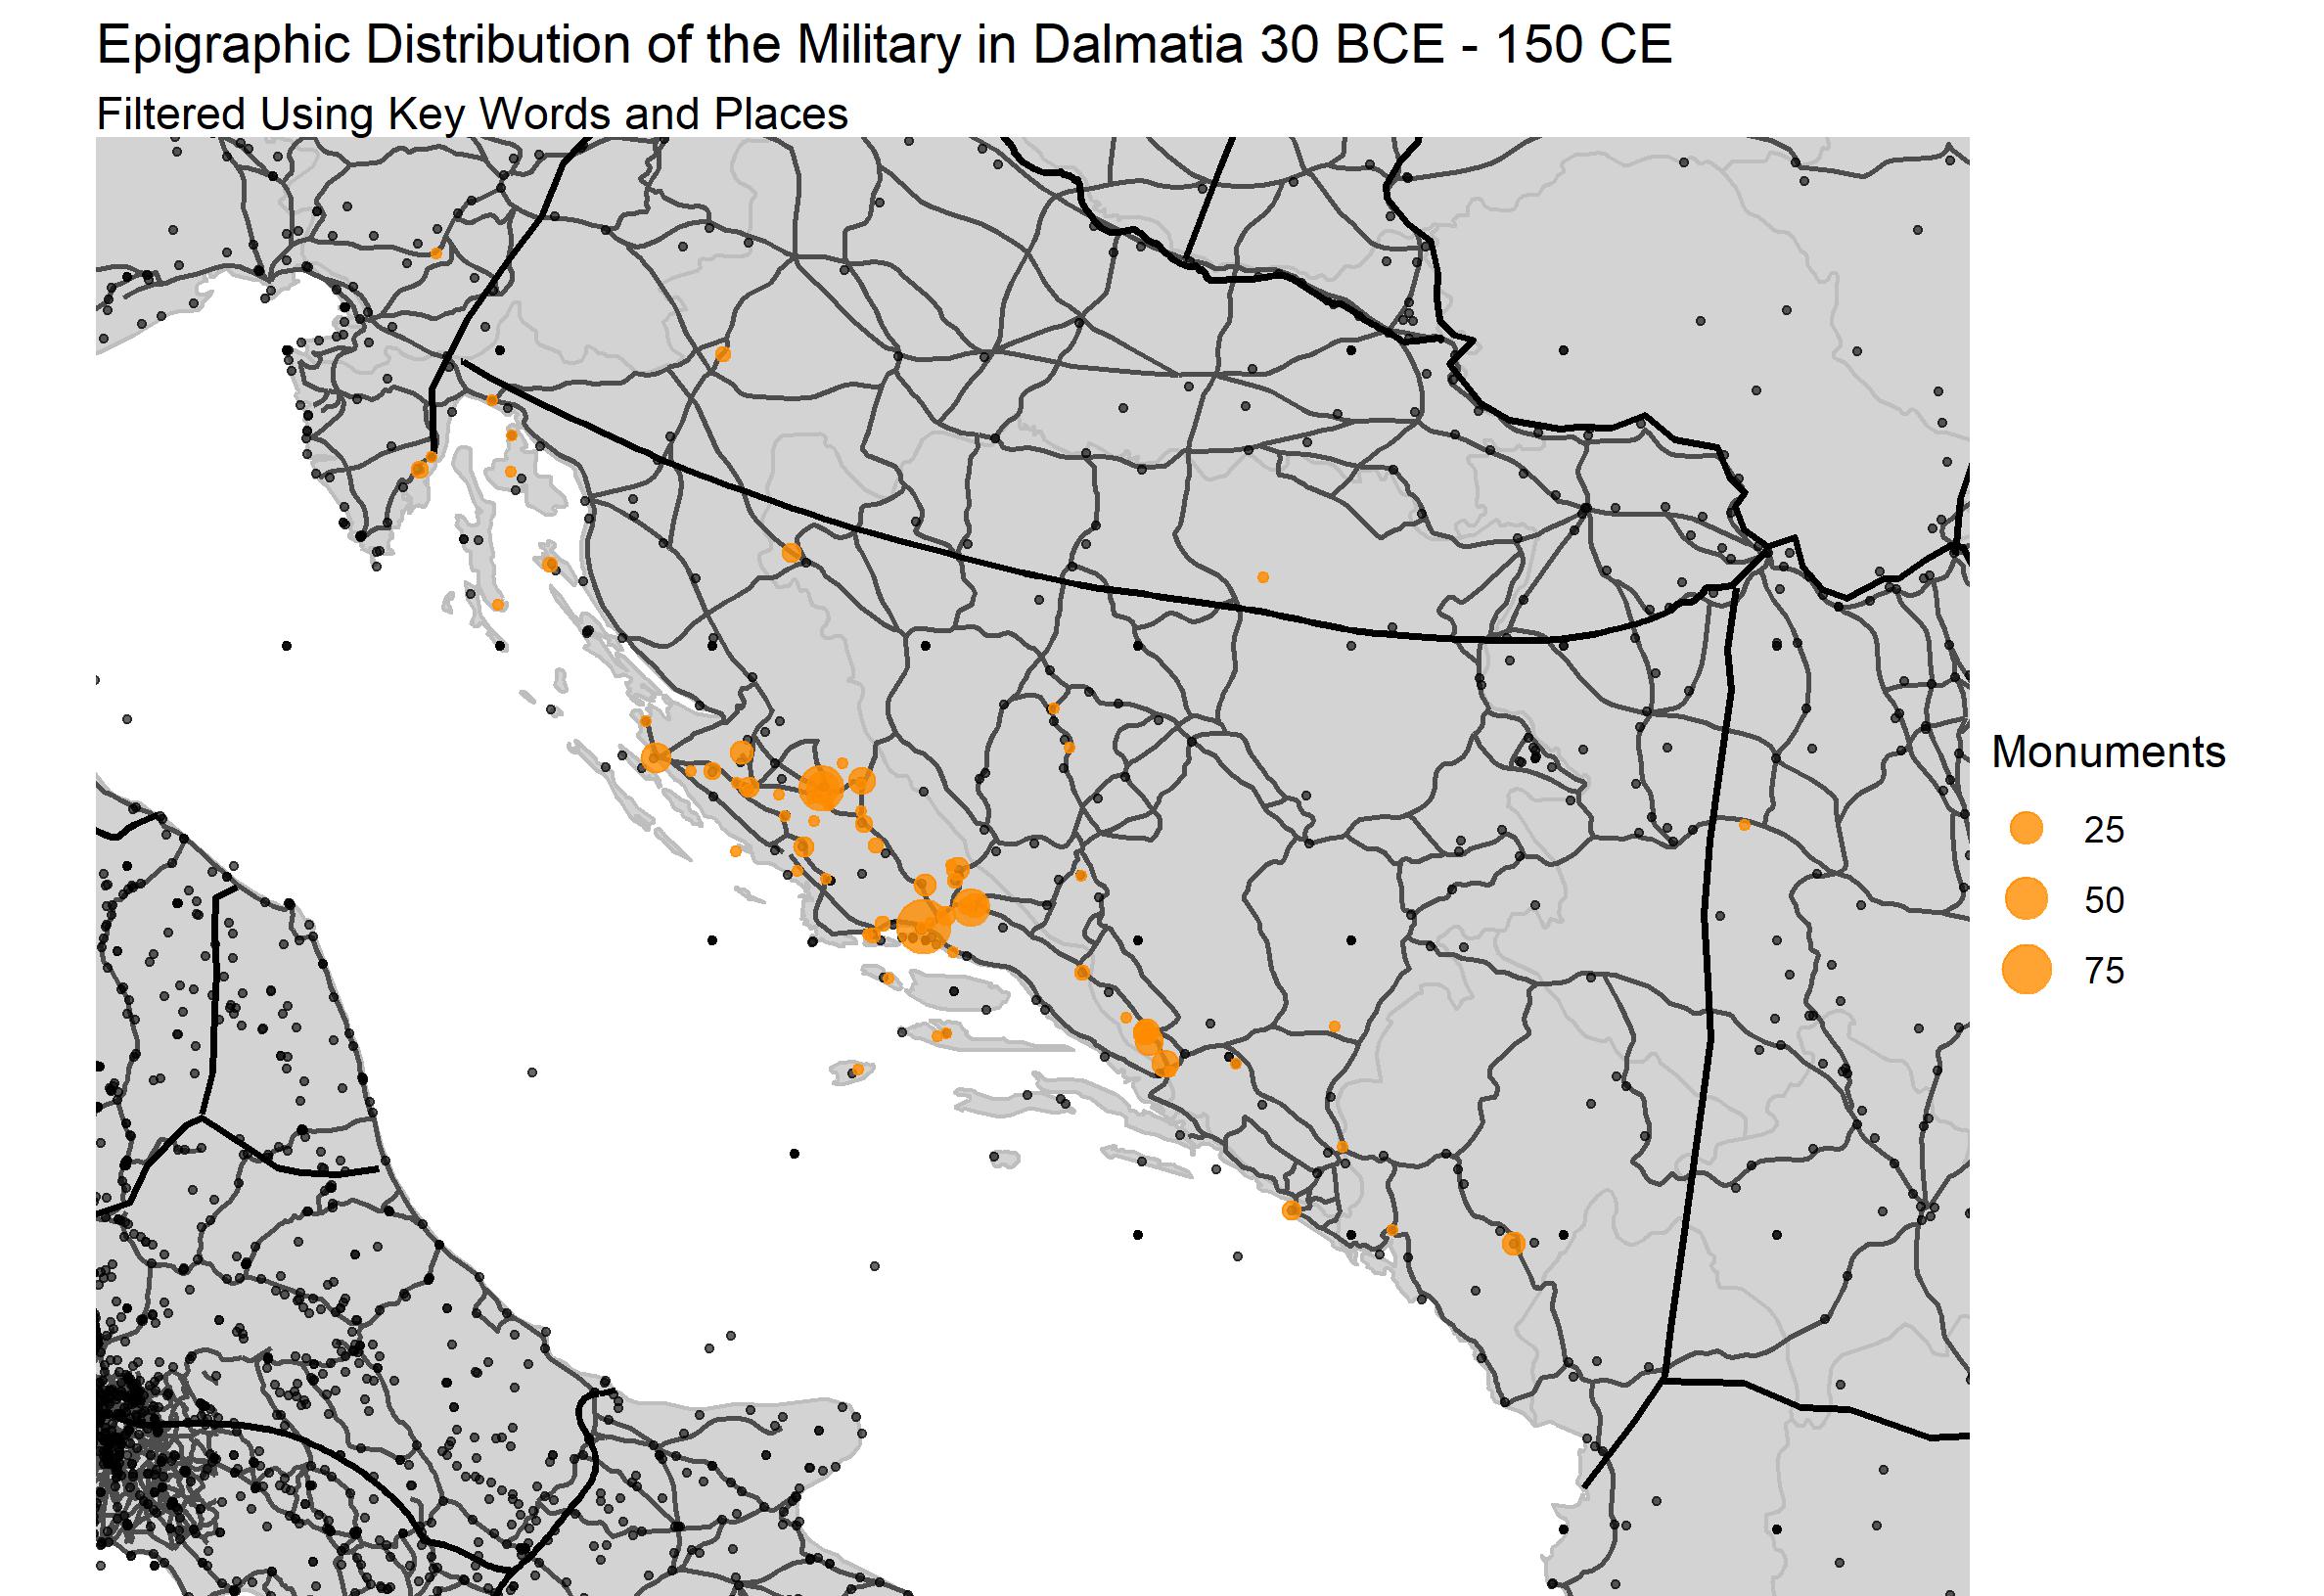 scaled scatter map of the distribution of military monuments in roman dalmatia. title reads Epigraphic Distribution of the Military in Dalmatia, subtitle reads Undated Monuments and Monuments Dated 30 BCE–150 CE. x-axis goes from 12 east to 22 east. y-axis goes from 41 north to 46 and a half north. map is of the eastern Adriatic coastline. Key consists of 4 orange circles increasing in size, with the smallest representing 25, the second 50, the third 75, and the last 100.